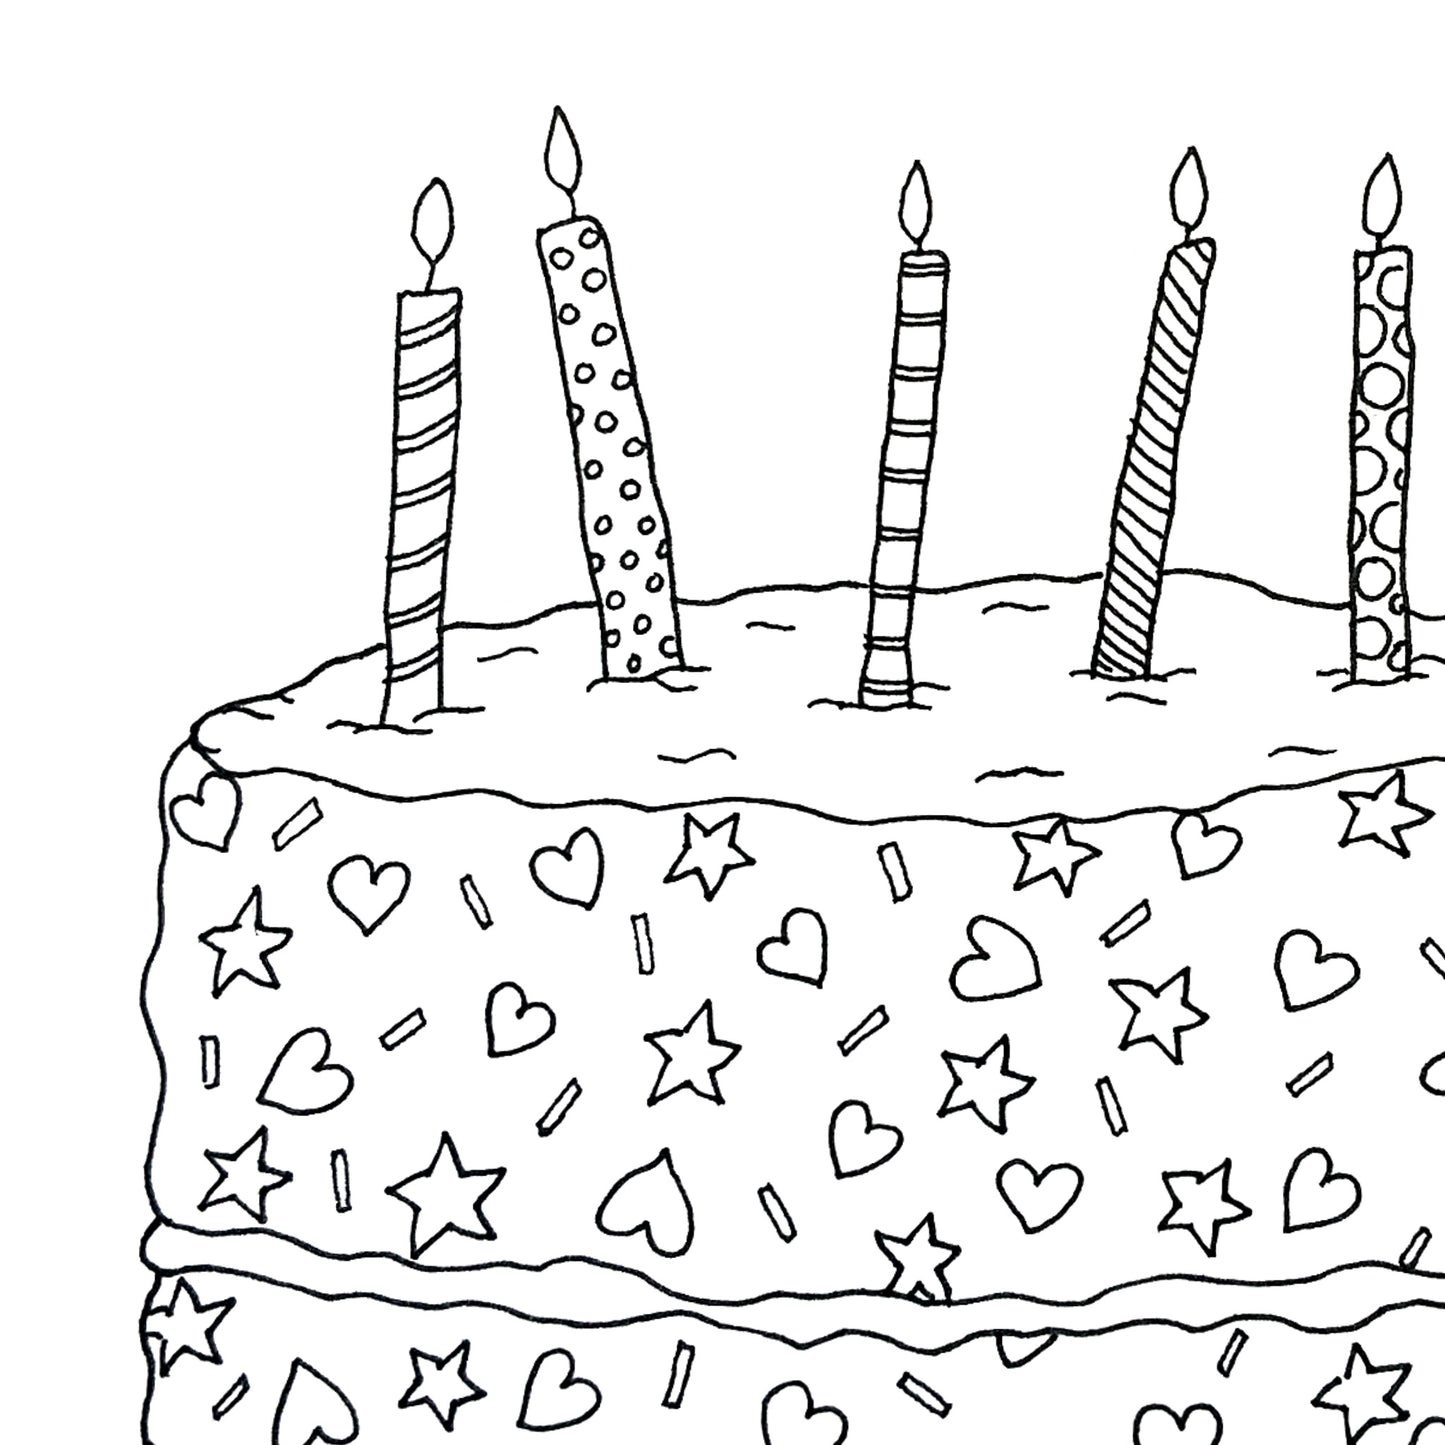 Closeup picture of our Birthday cake card made to be coloured in. There are lots of little details like hearts, stars, and sprinkles to be coloured in by children of all ages. There are 5 candles on top, all with different decorative shapes on them for coloring.